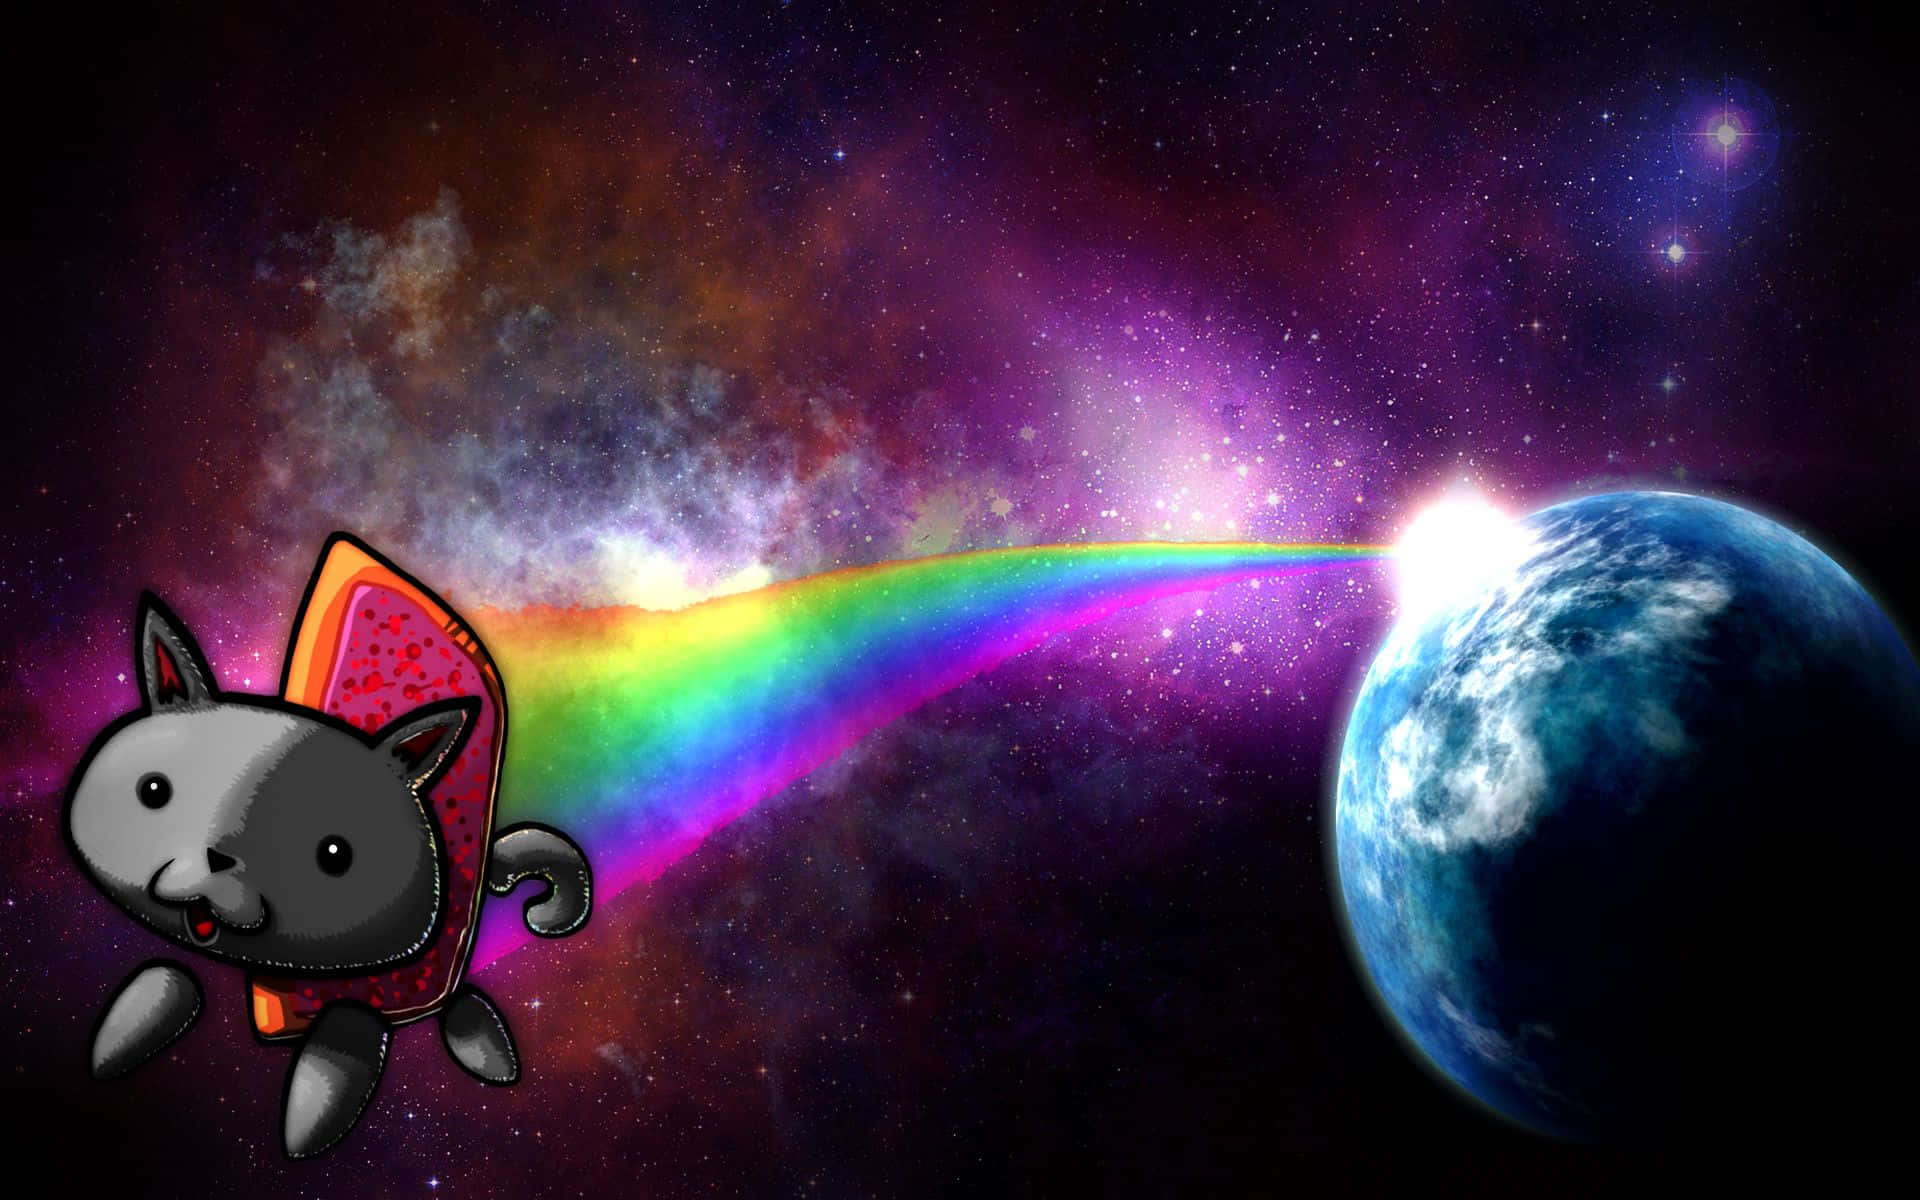 Take a trip to the galaxies with Galaxy Cat Wallpaper